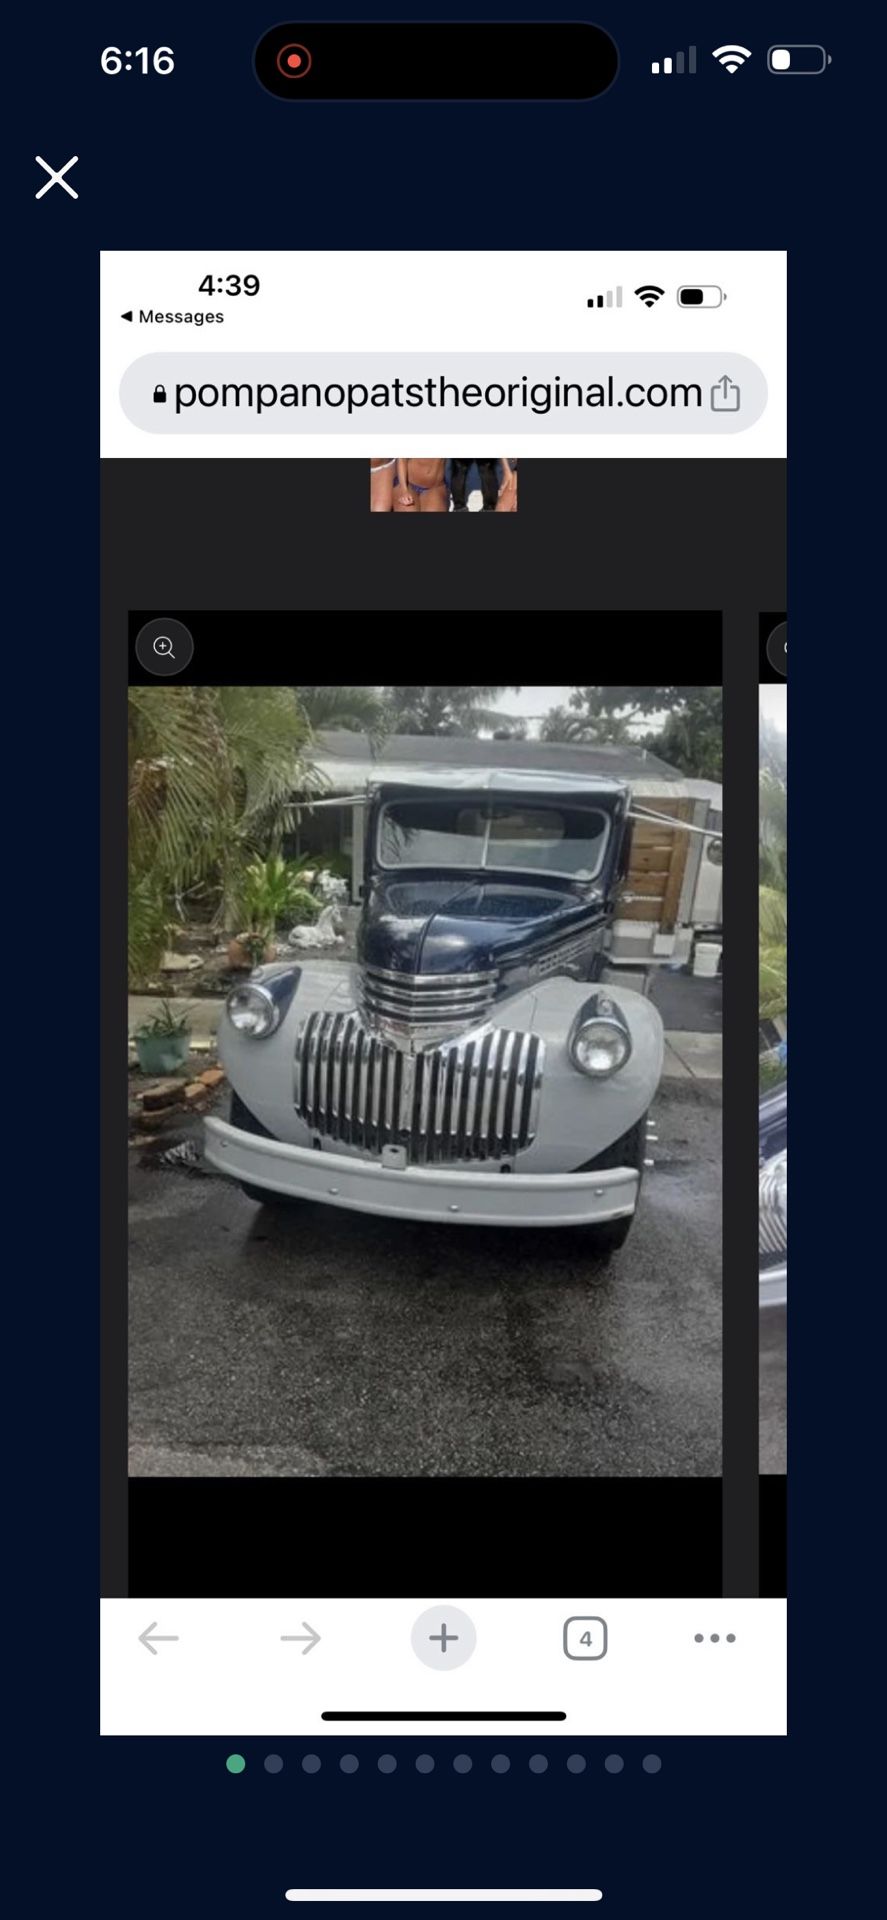 1947 Chevy Dump Truck And Shit Wouldn’t Take Long To Get It Going